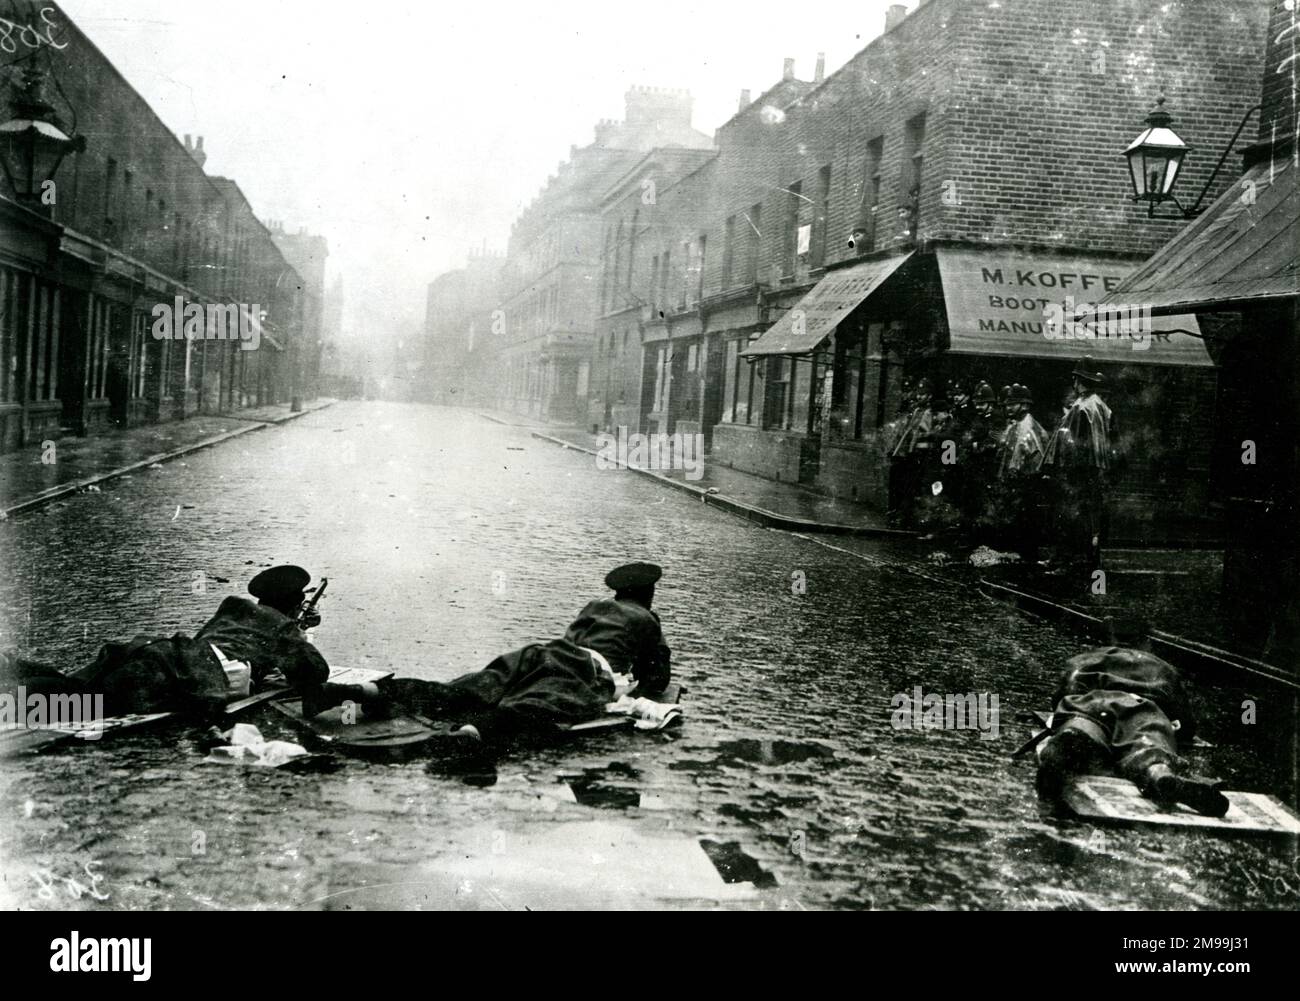 Soldiers lie in the cobblestoned roadway during the Sidney Street Siege, London, ready to shoot on sight. Stock Photo